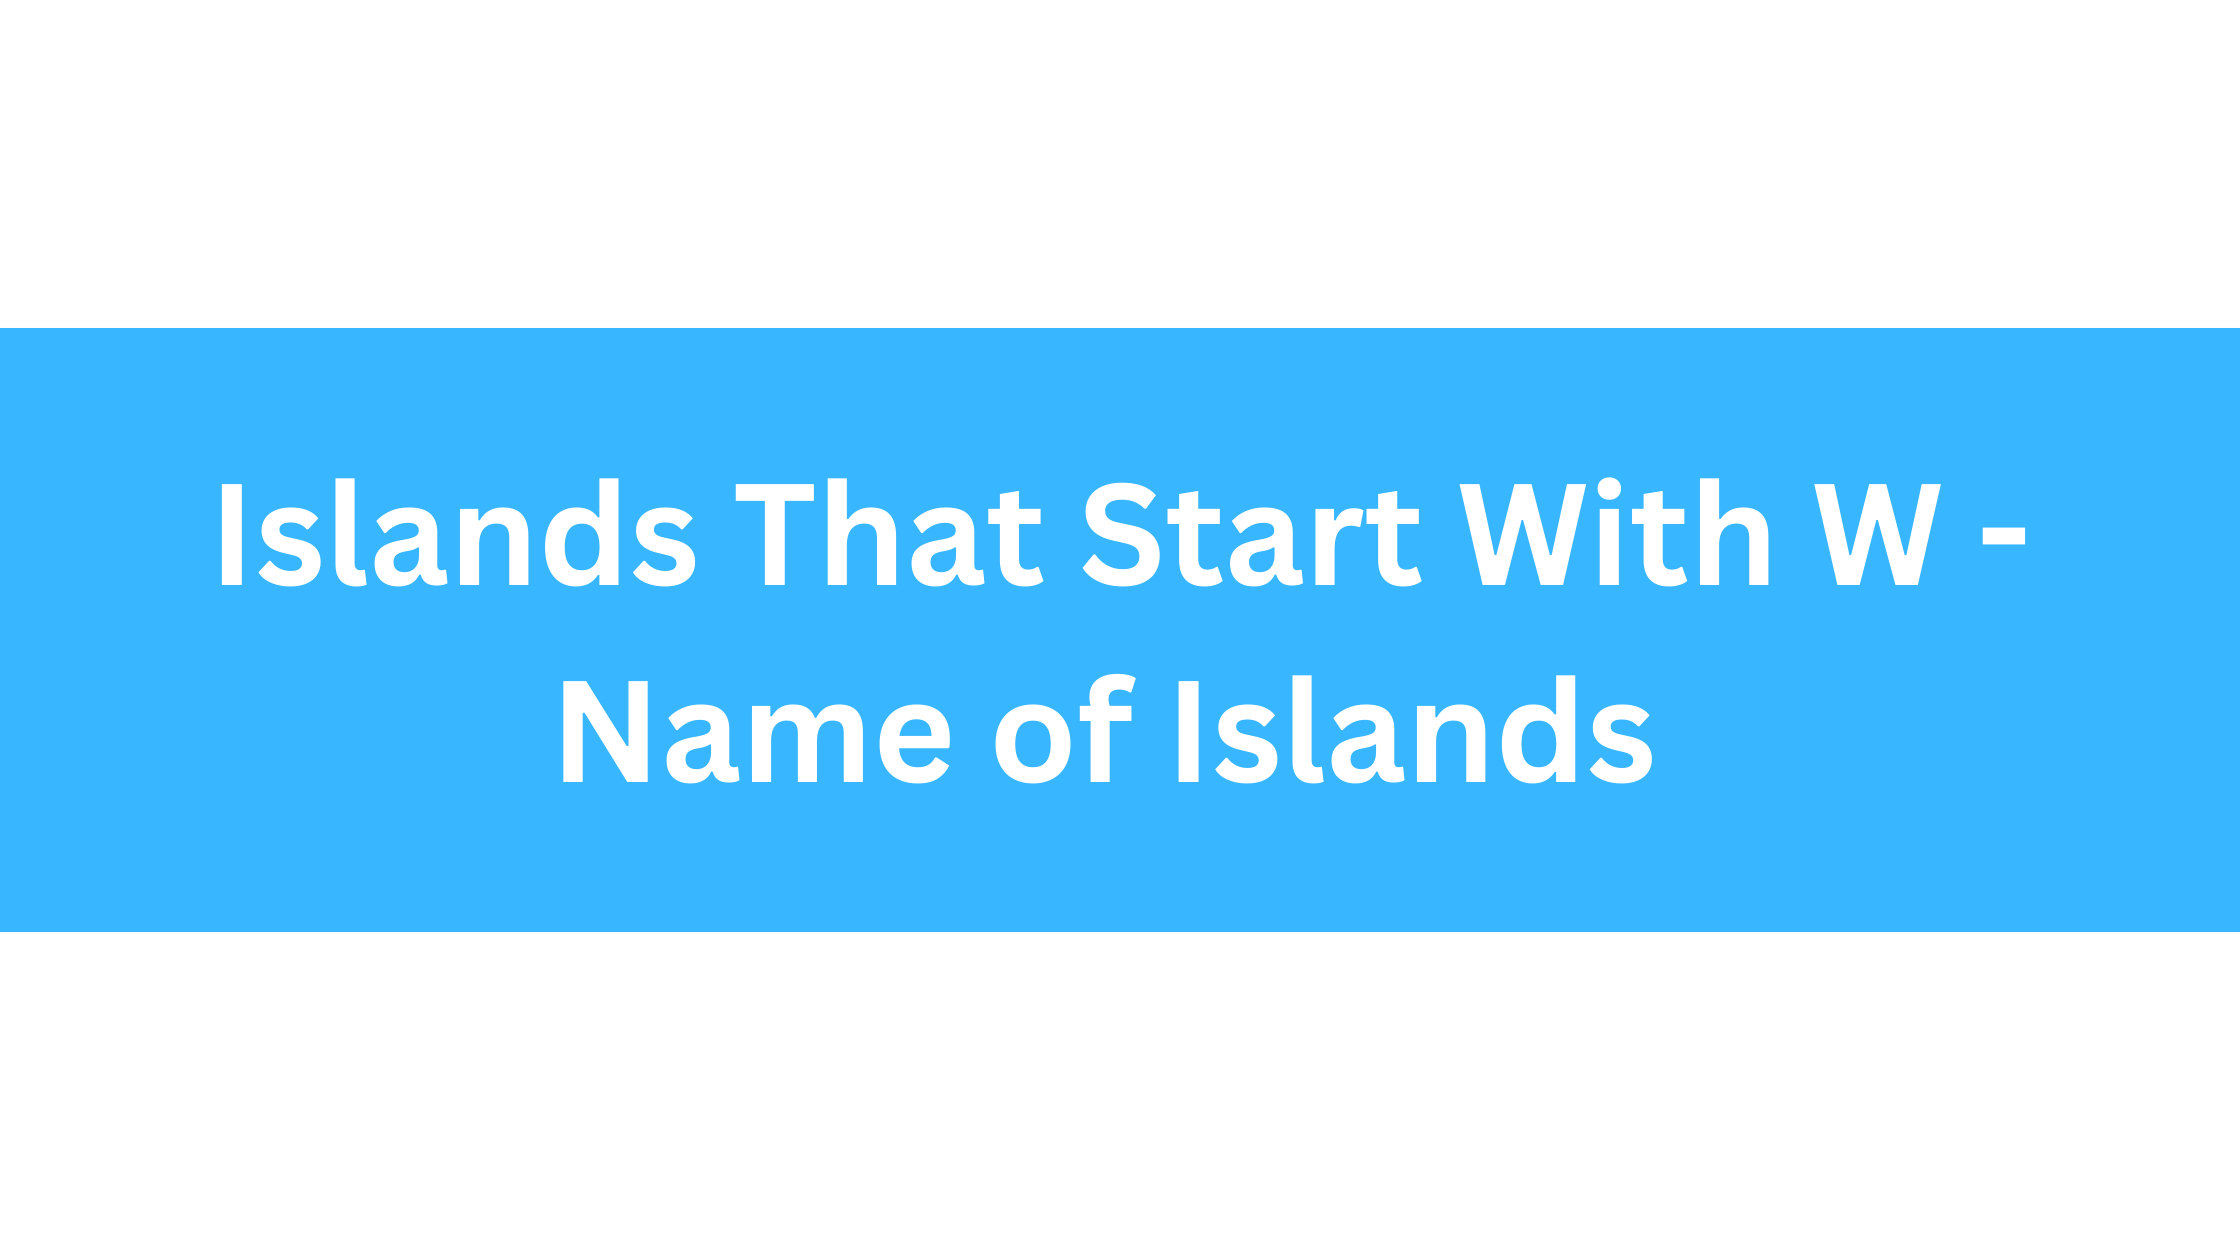 Islands That Start With W